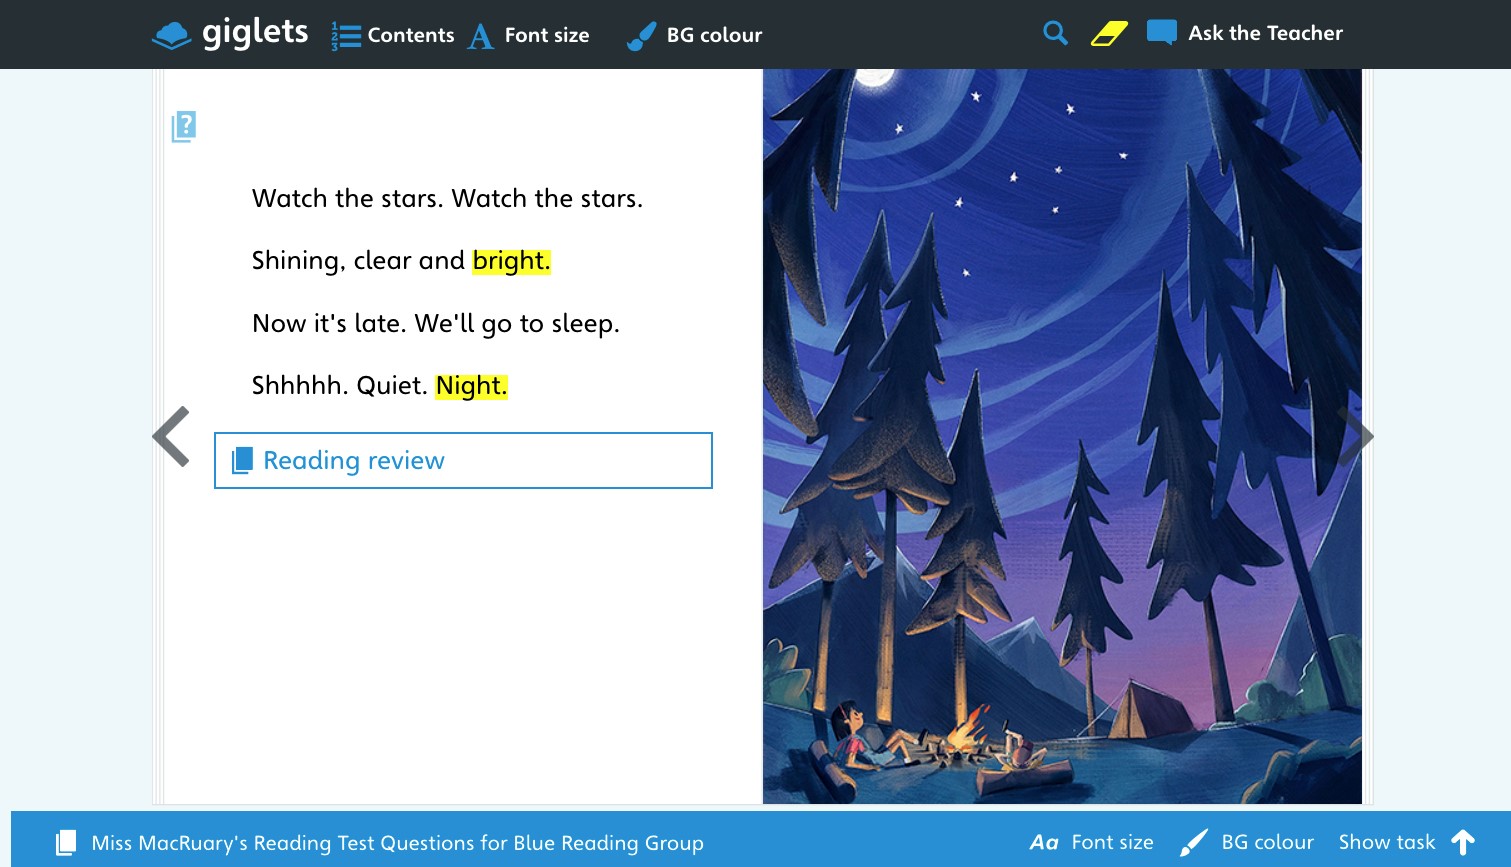 An image showing a pupil reading Going Camping on Giglets and starting a task set by their teacher.